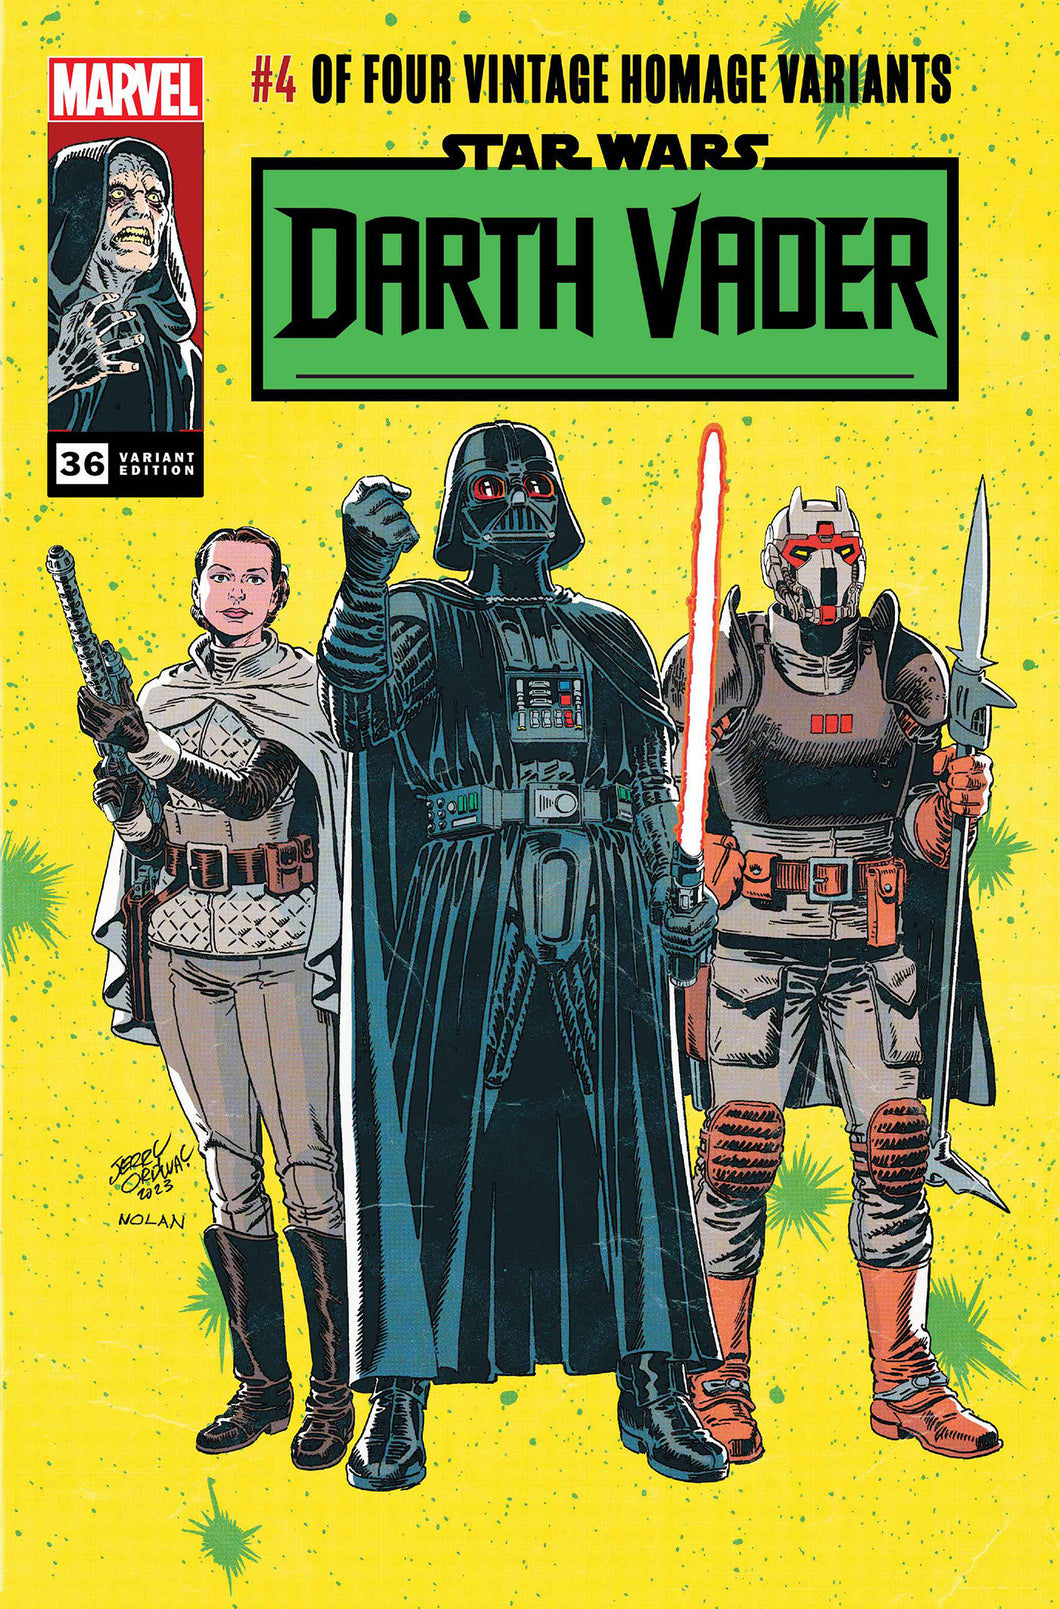 Star Wars: Darth Vader 36 Jerry Ordway Classic Trade Dress Variant